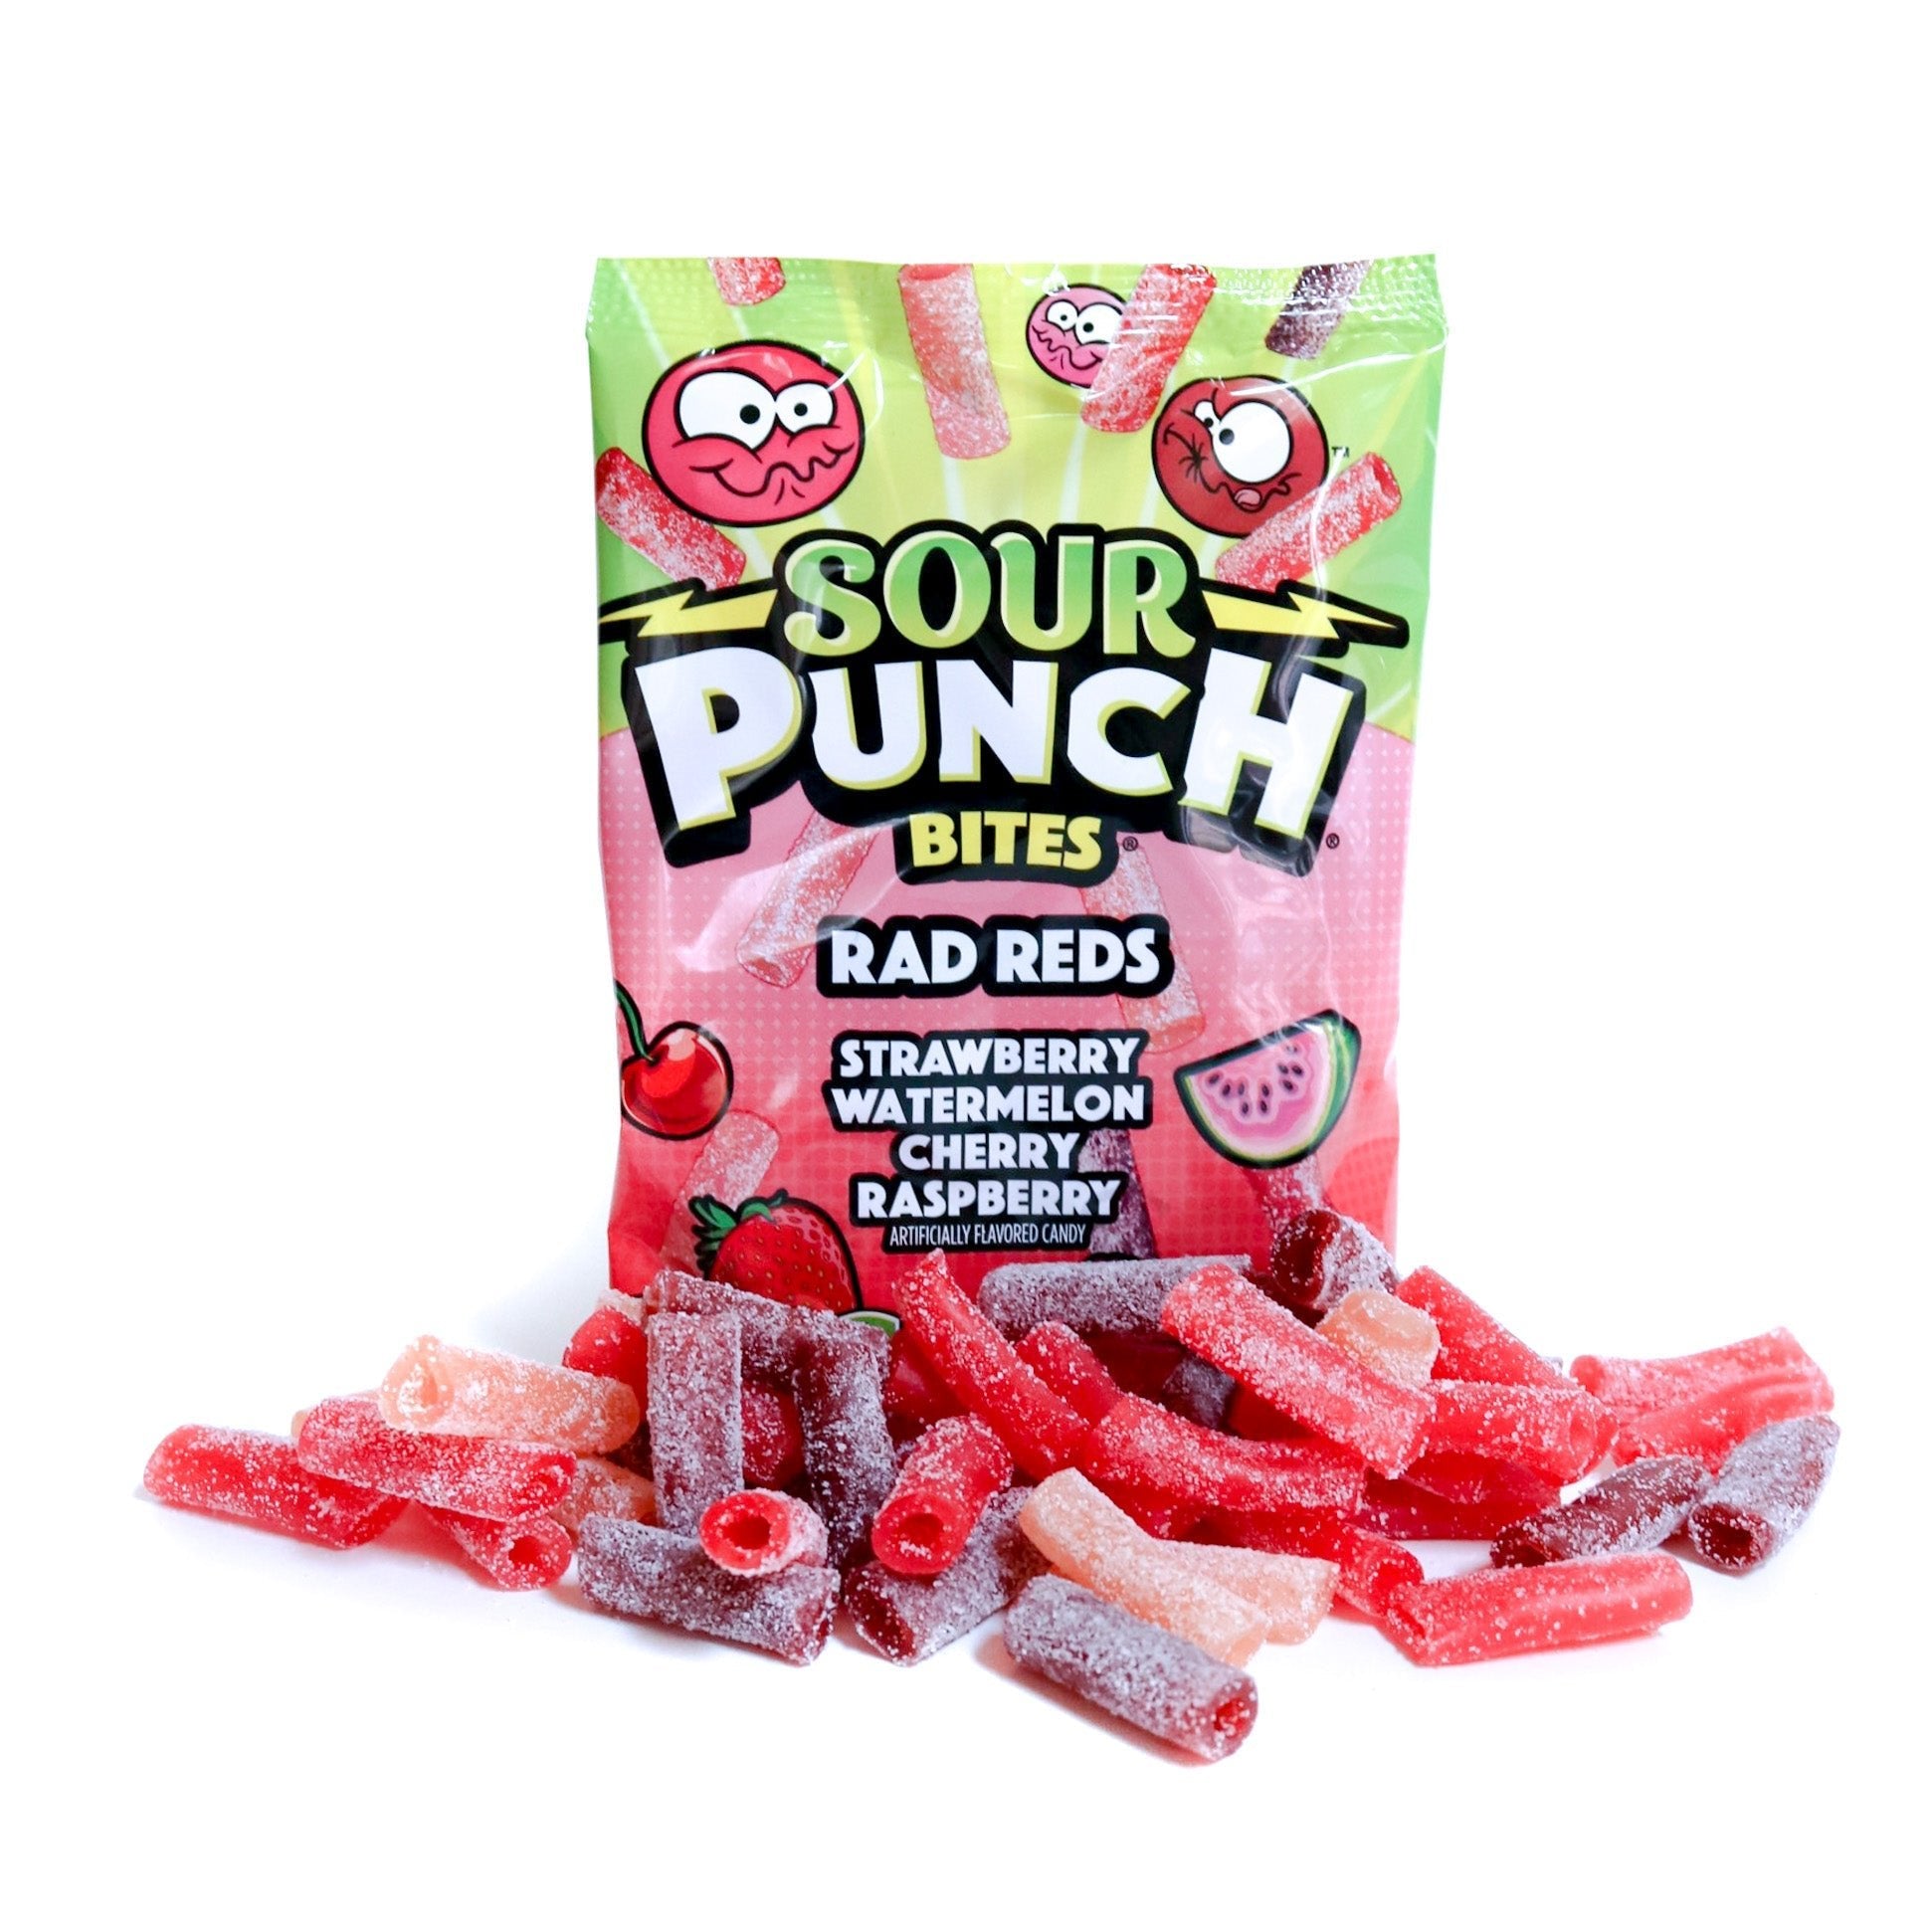 Strawberry, watermelon, cherry, and raspberry sour bites in front of Sour Punch Rad Reds hanging bag